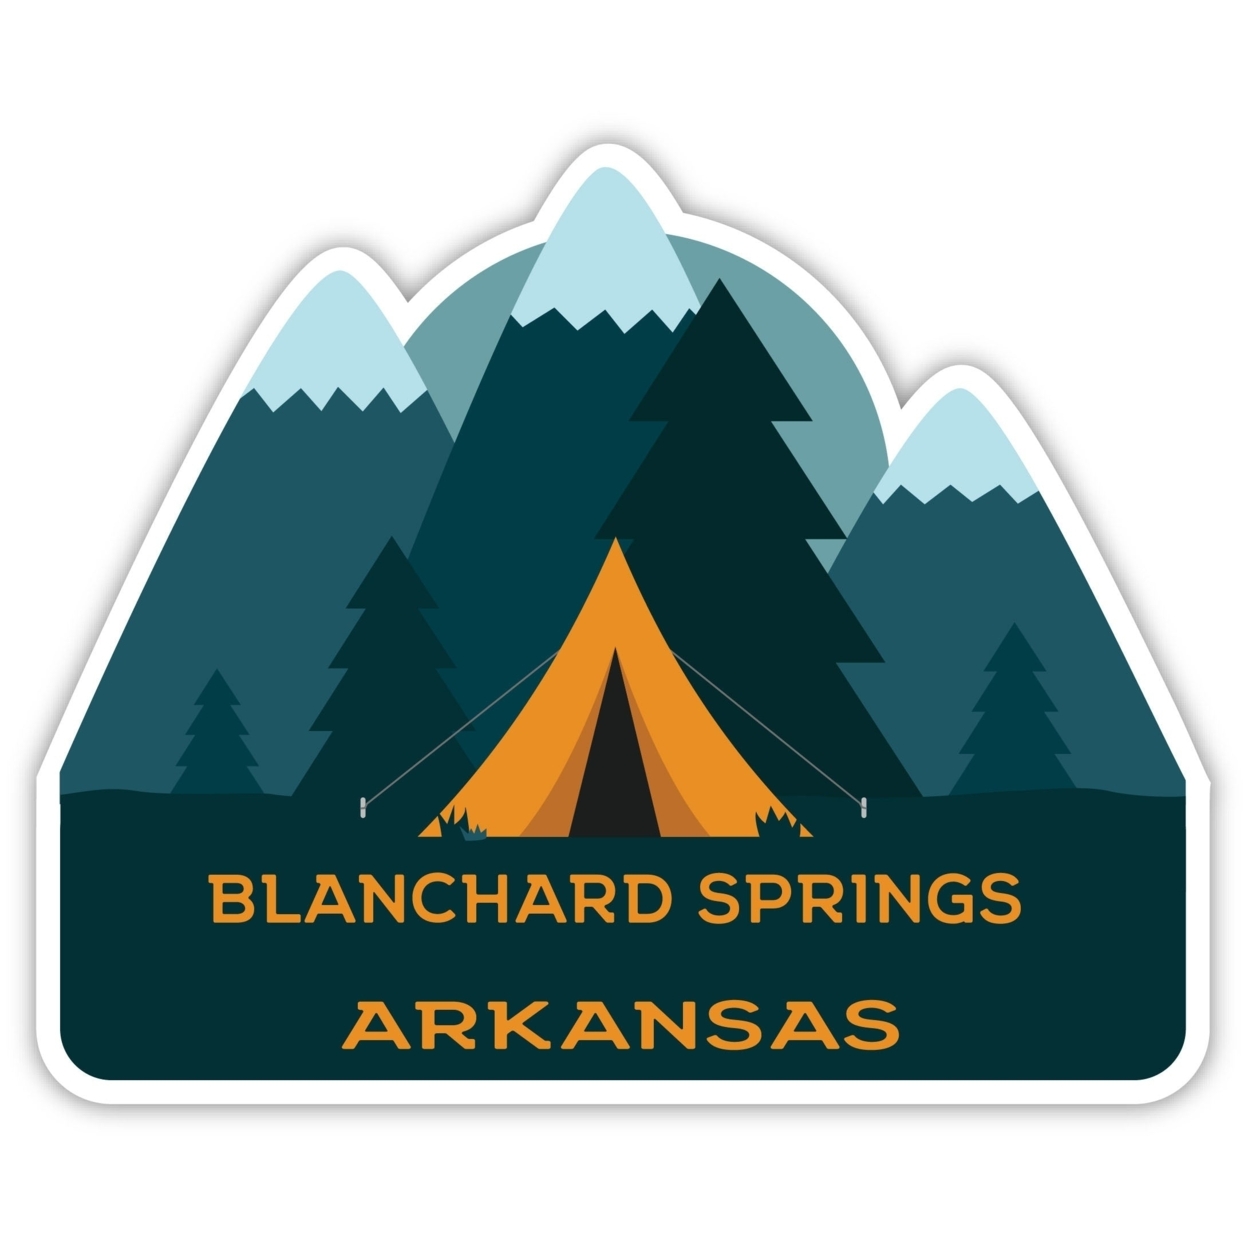 Blanchard Springs Arkansas Souvenir Decorative Stickers (Choose Theme And Size) - 4-Pack, 10-Inch, Adventures Awaits